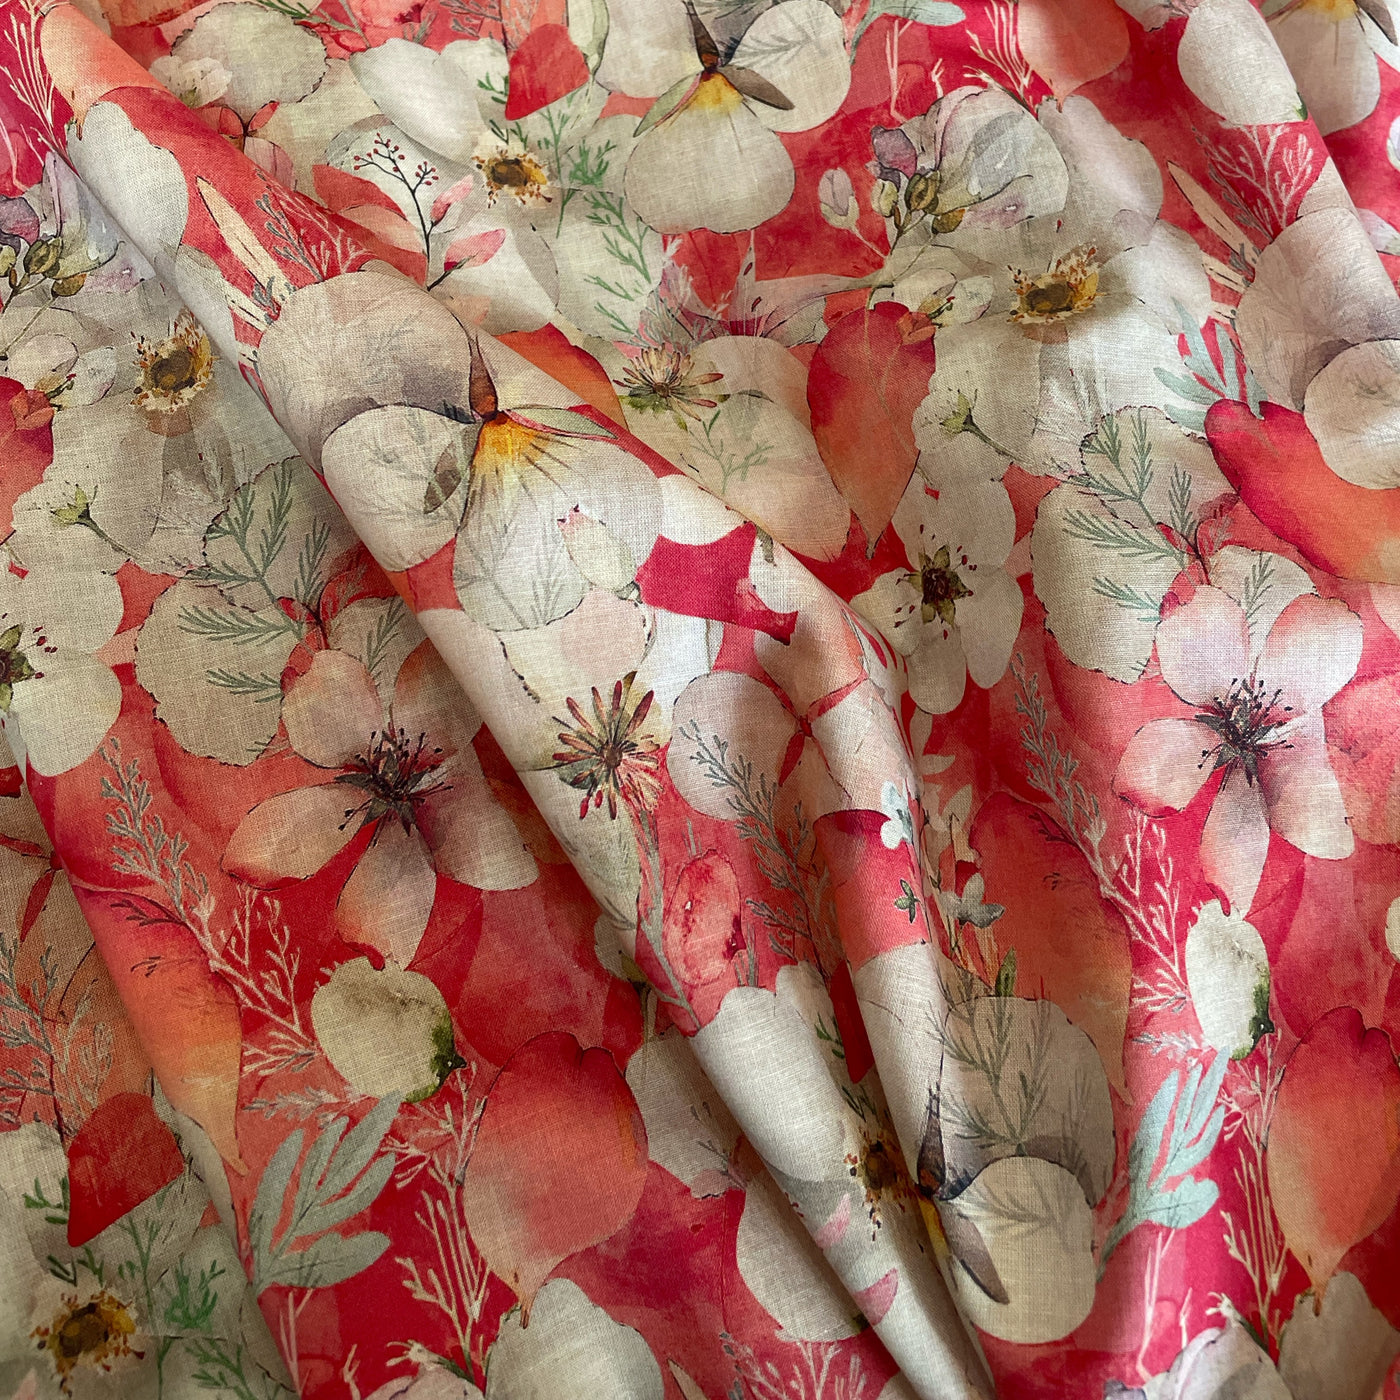 Luxurious red Digital Cotton Lawn floral prints are lightweight and soft with beautiful drape – perfect for dresses, blouses, skirts and crafts. At a width of 135cm / 53" and a weight of 75gsm